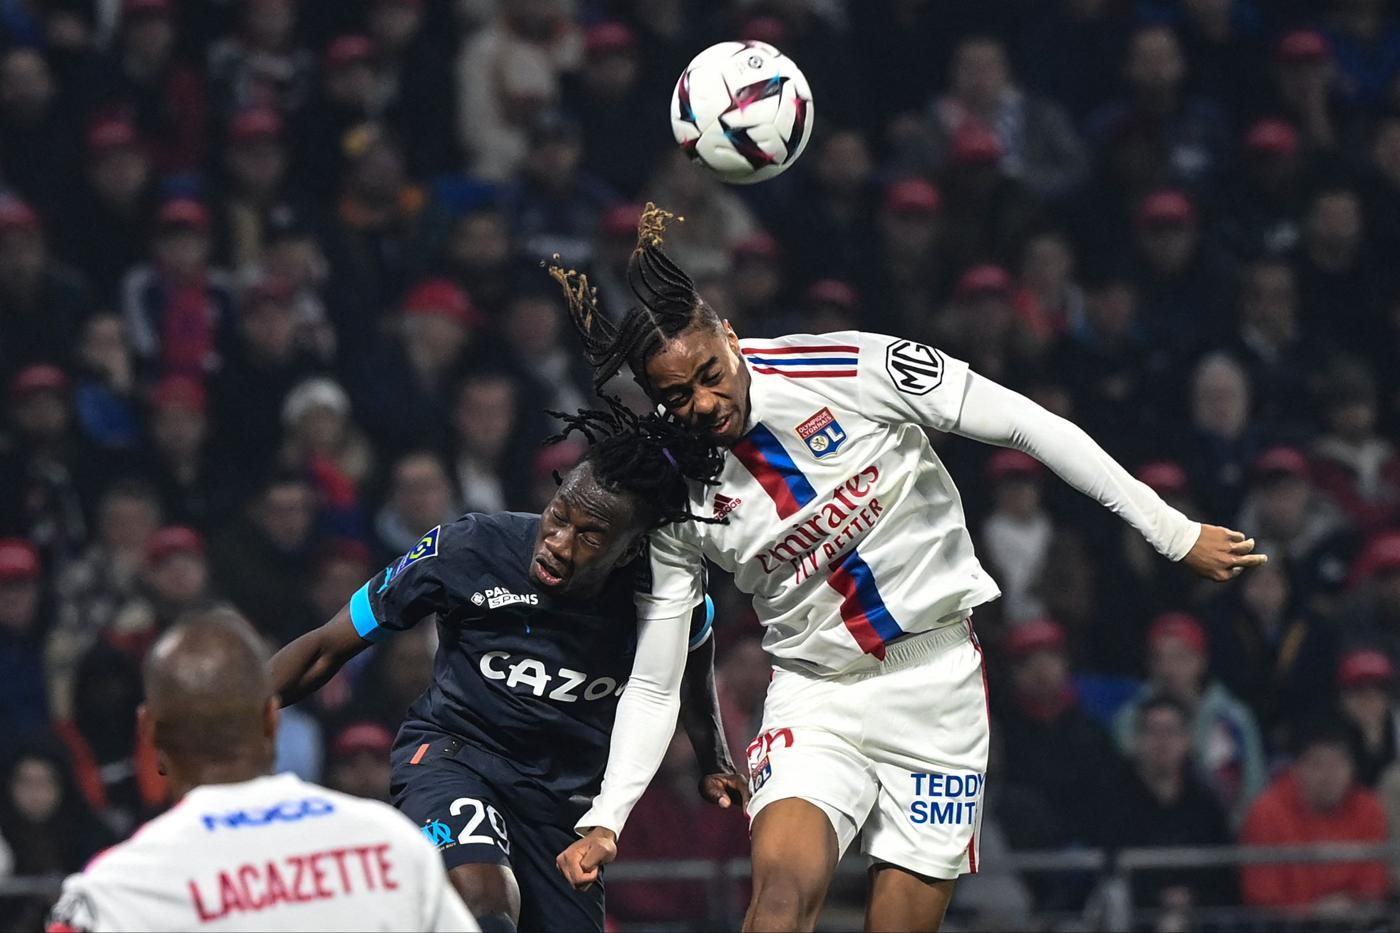 Lyon - Marseille: where to watch, online broadcast (April 23)